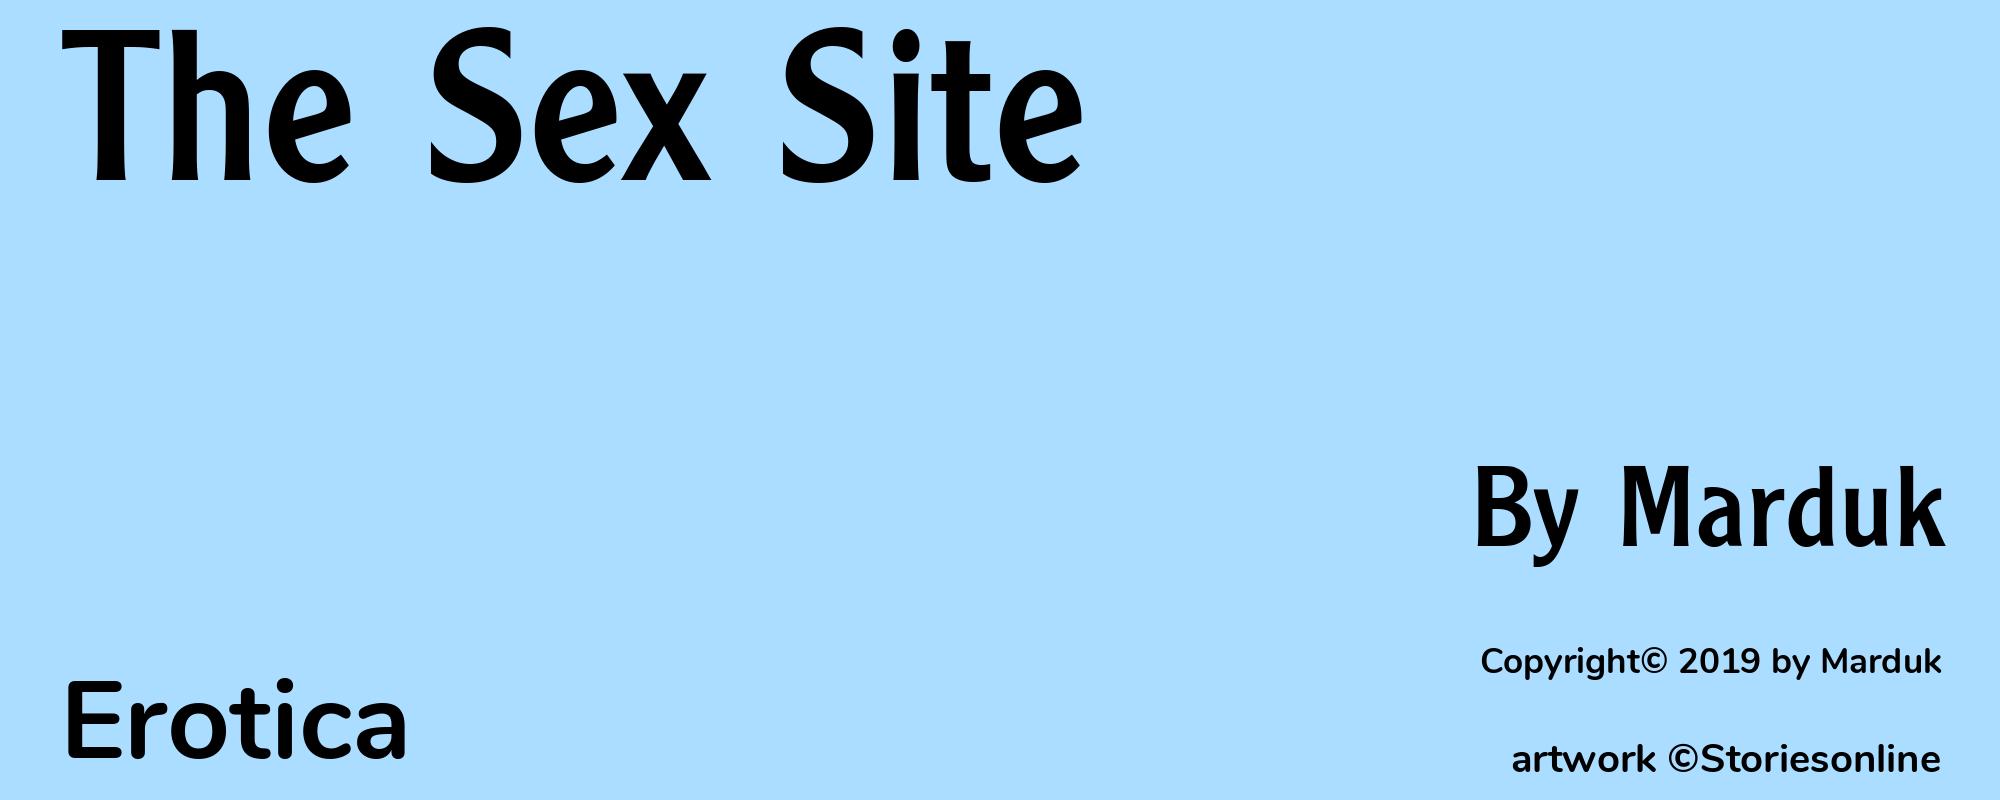 The Sex Site - Cover